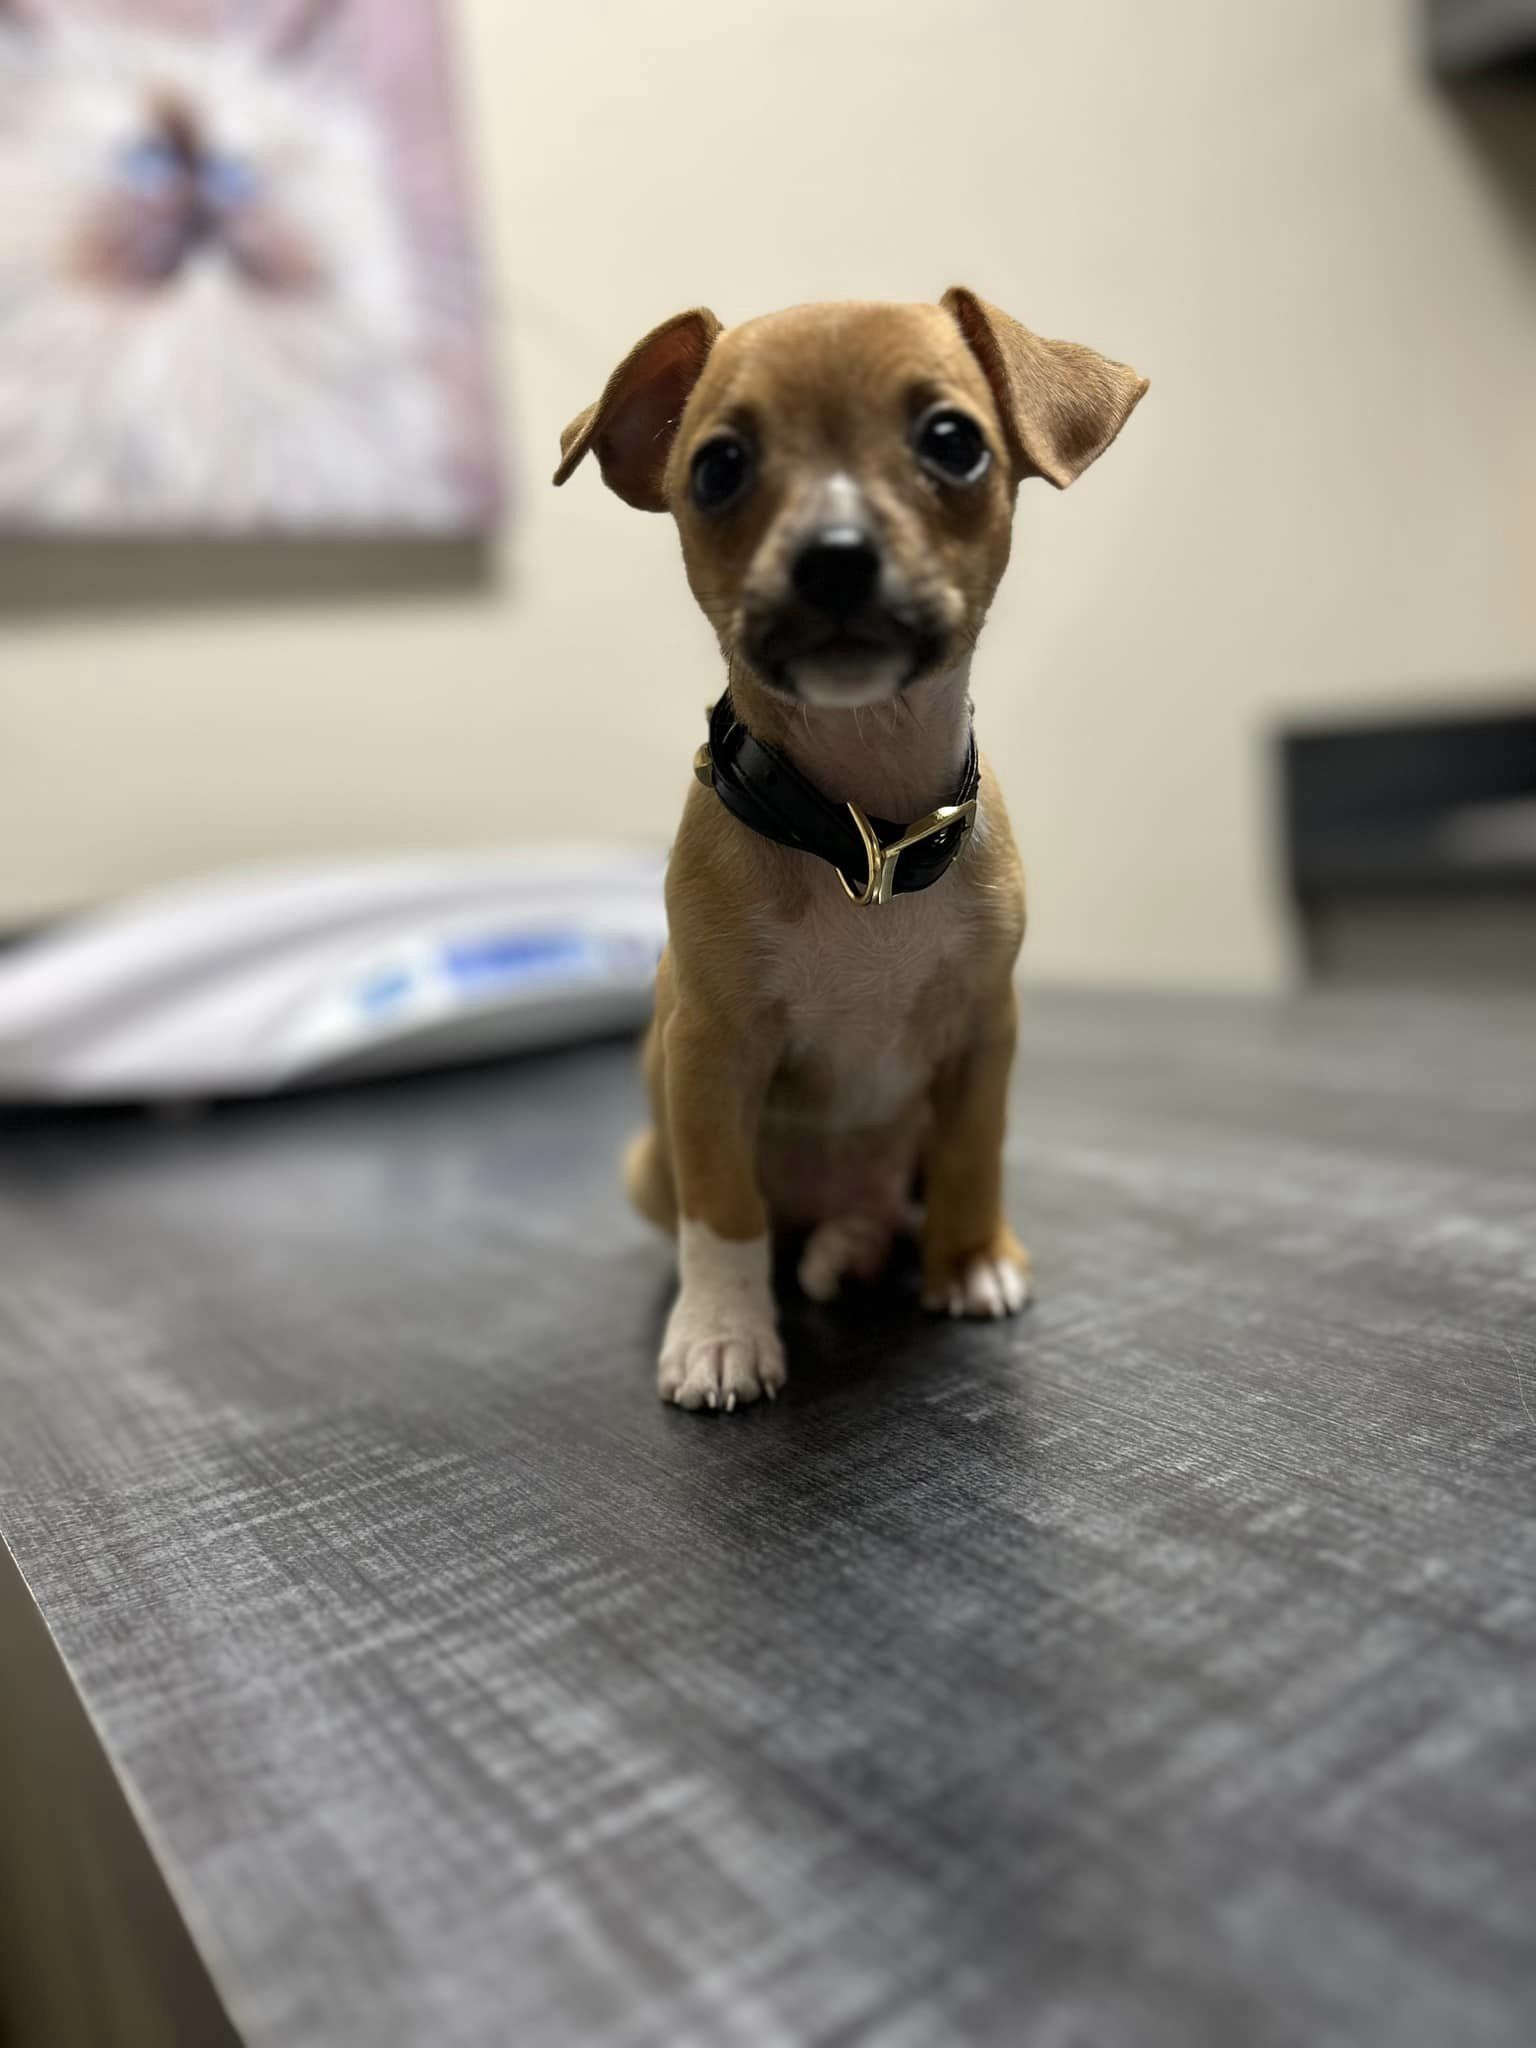 tiny puppy on a table